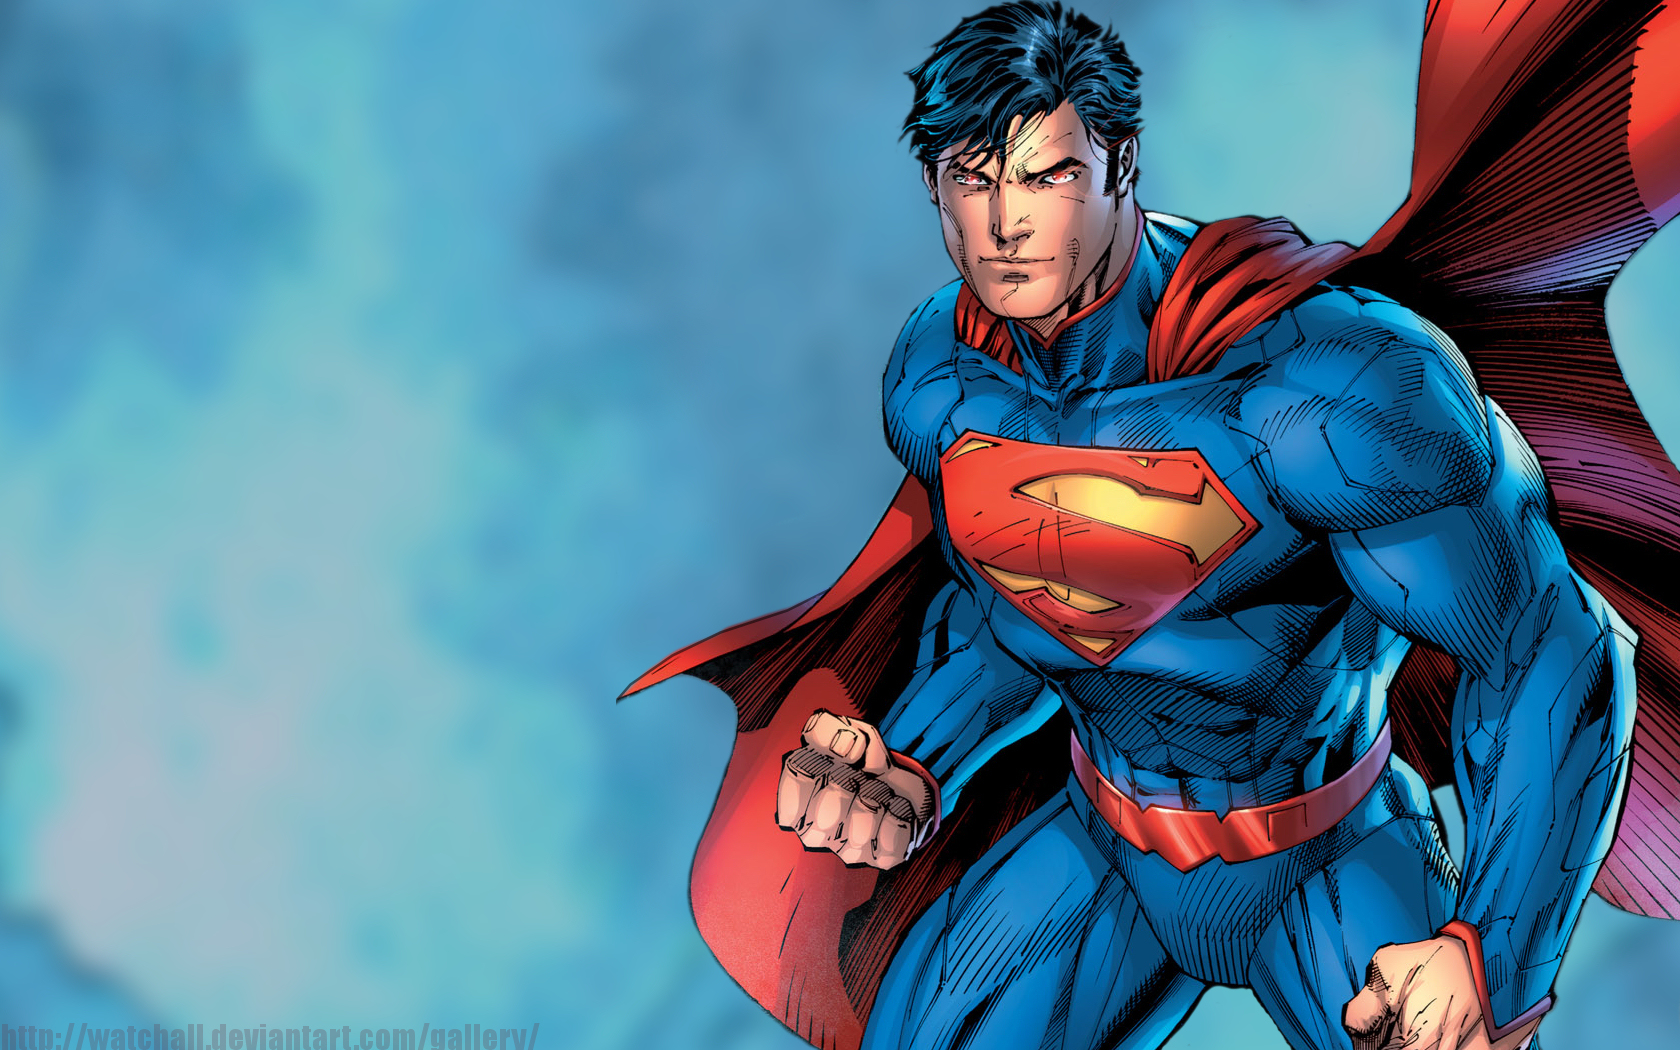 superman_by_watchall-d48in48.jpg